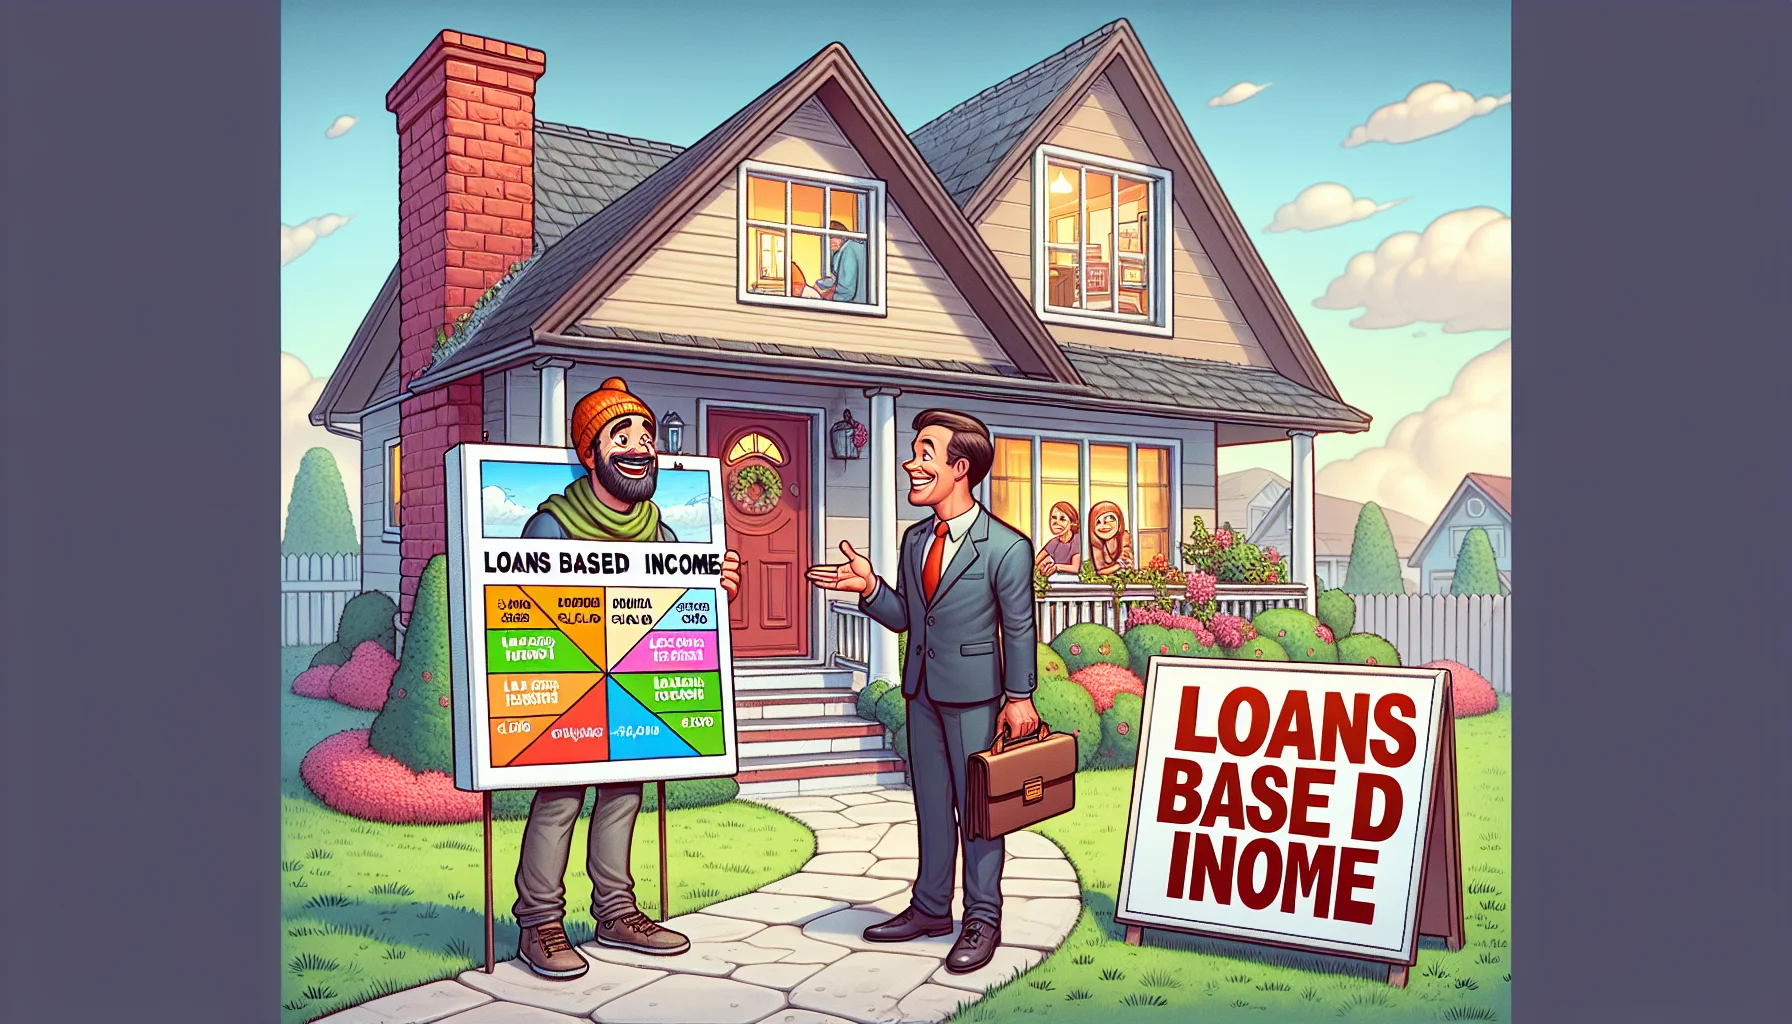 Imagine a humorous but realistic scene in a perfect world regarding real estate financing. A smiling realtor, a Caucasian man, is standing in front of a charming, affordable home, presenting it to a potential female Middle-Eastern buyer. He displays a colorful chart, clearly showing different loan options tailored to income levels. Nearby, a sign that says 'loans based on income' stands proudly. The house radiates coziness and affordability, with a well-tended garden that adds to the overall appeal. The potential buyer seems overjoyed, adding to the humor and pleasantness of the scenario.